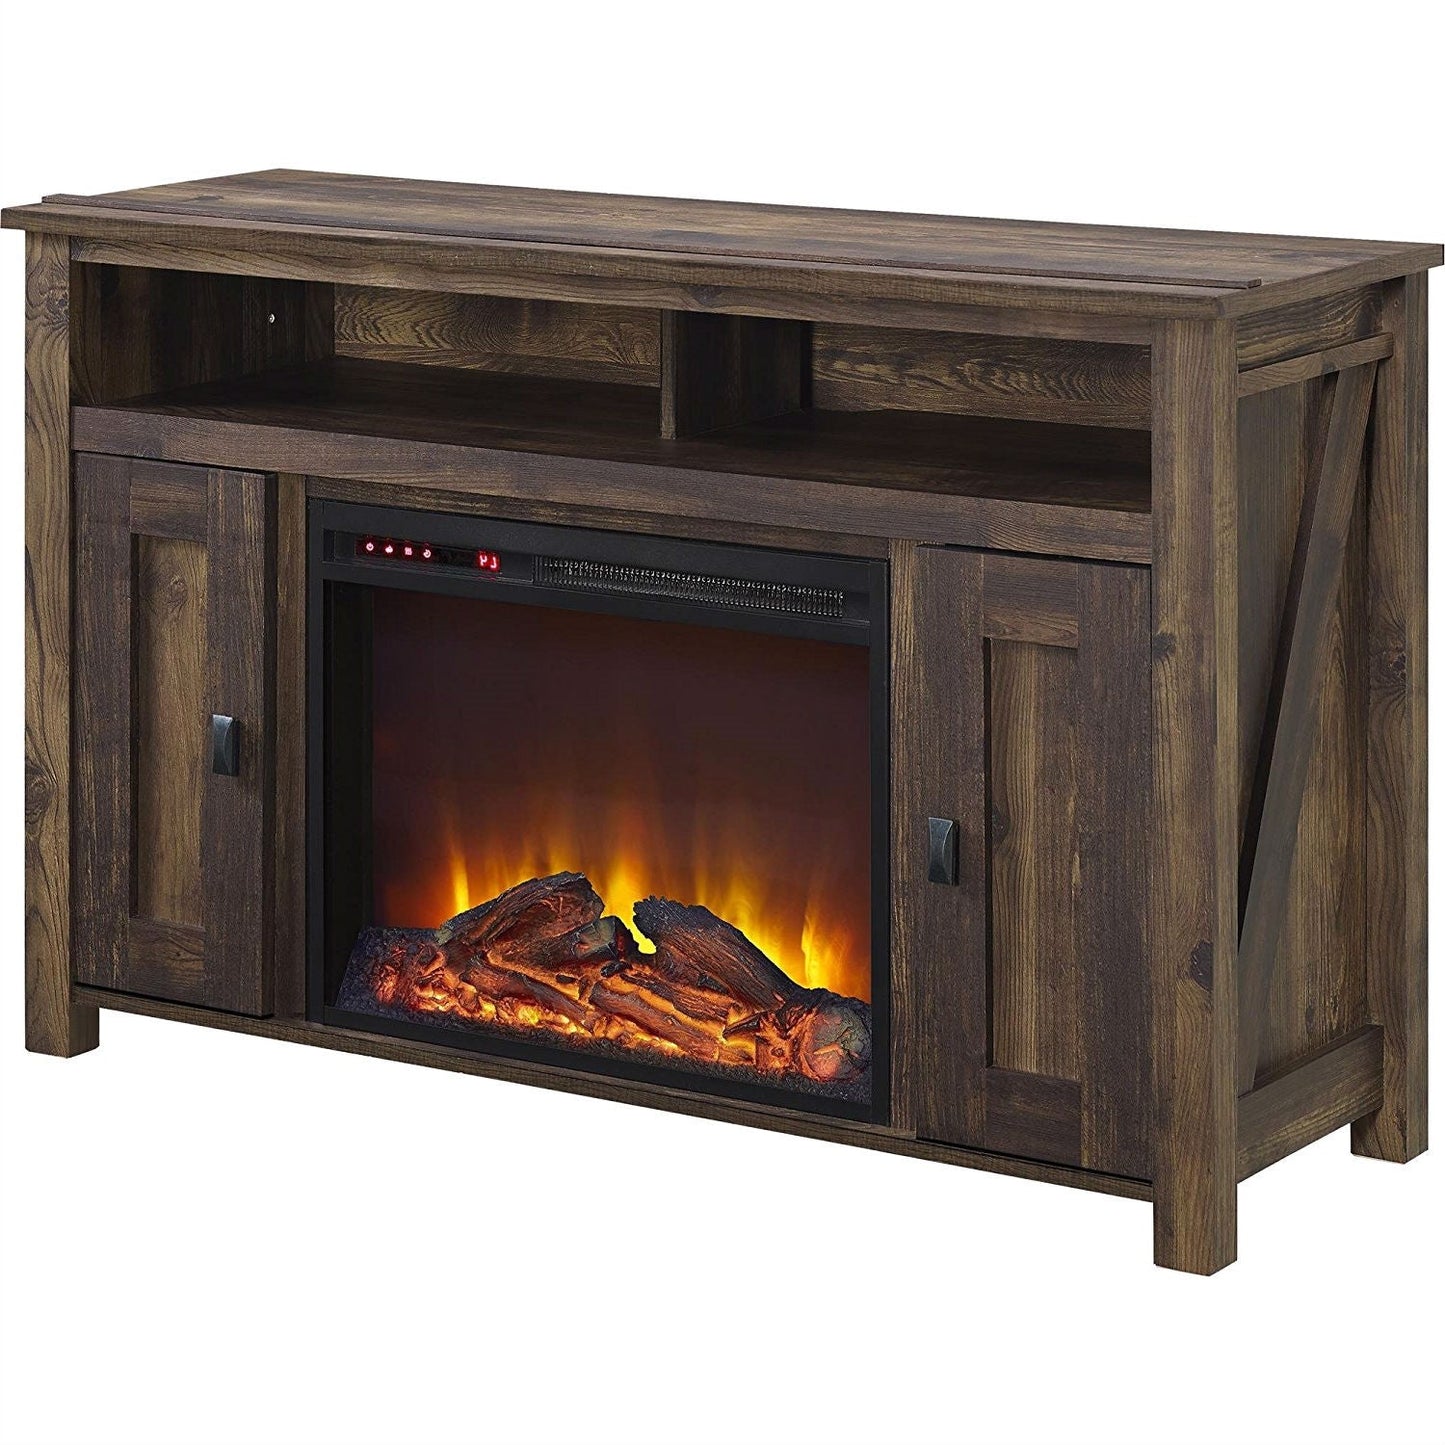 Accents > Electric Fireplaces - 50-inch TV Stand In Medium Brown Wood With 1,500 Watt Electric Fireplace